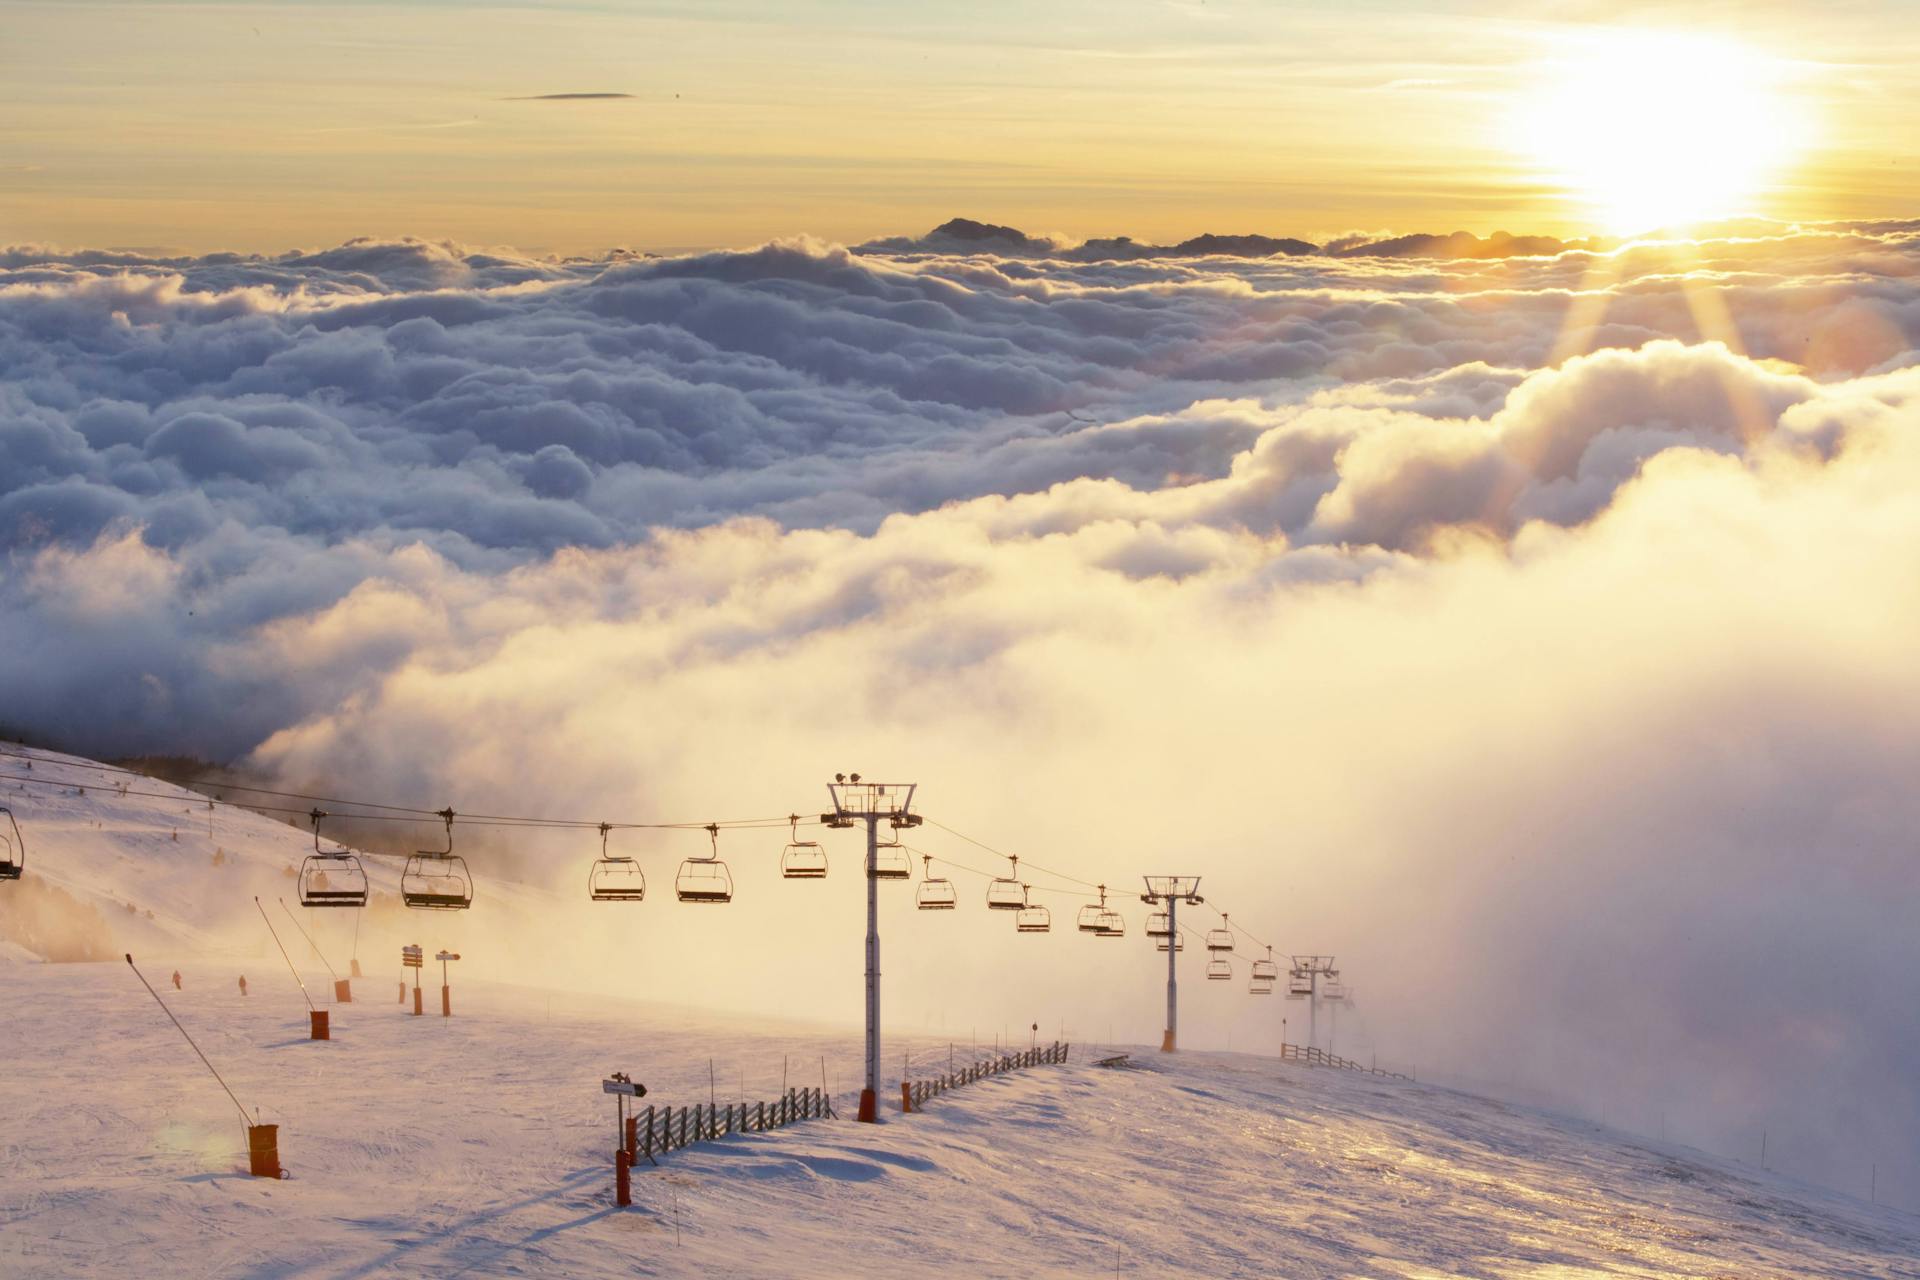 Chairlifts above ski slope at sunset